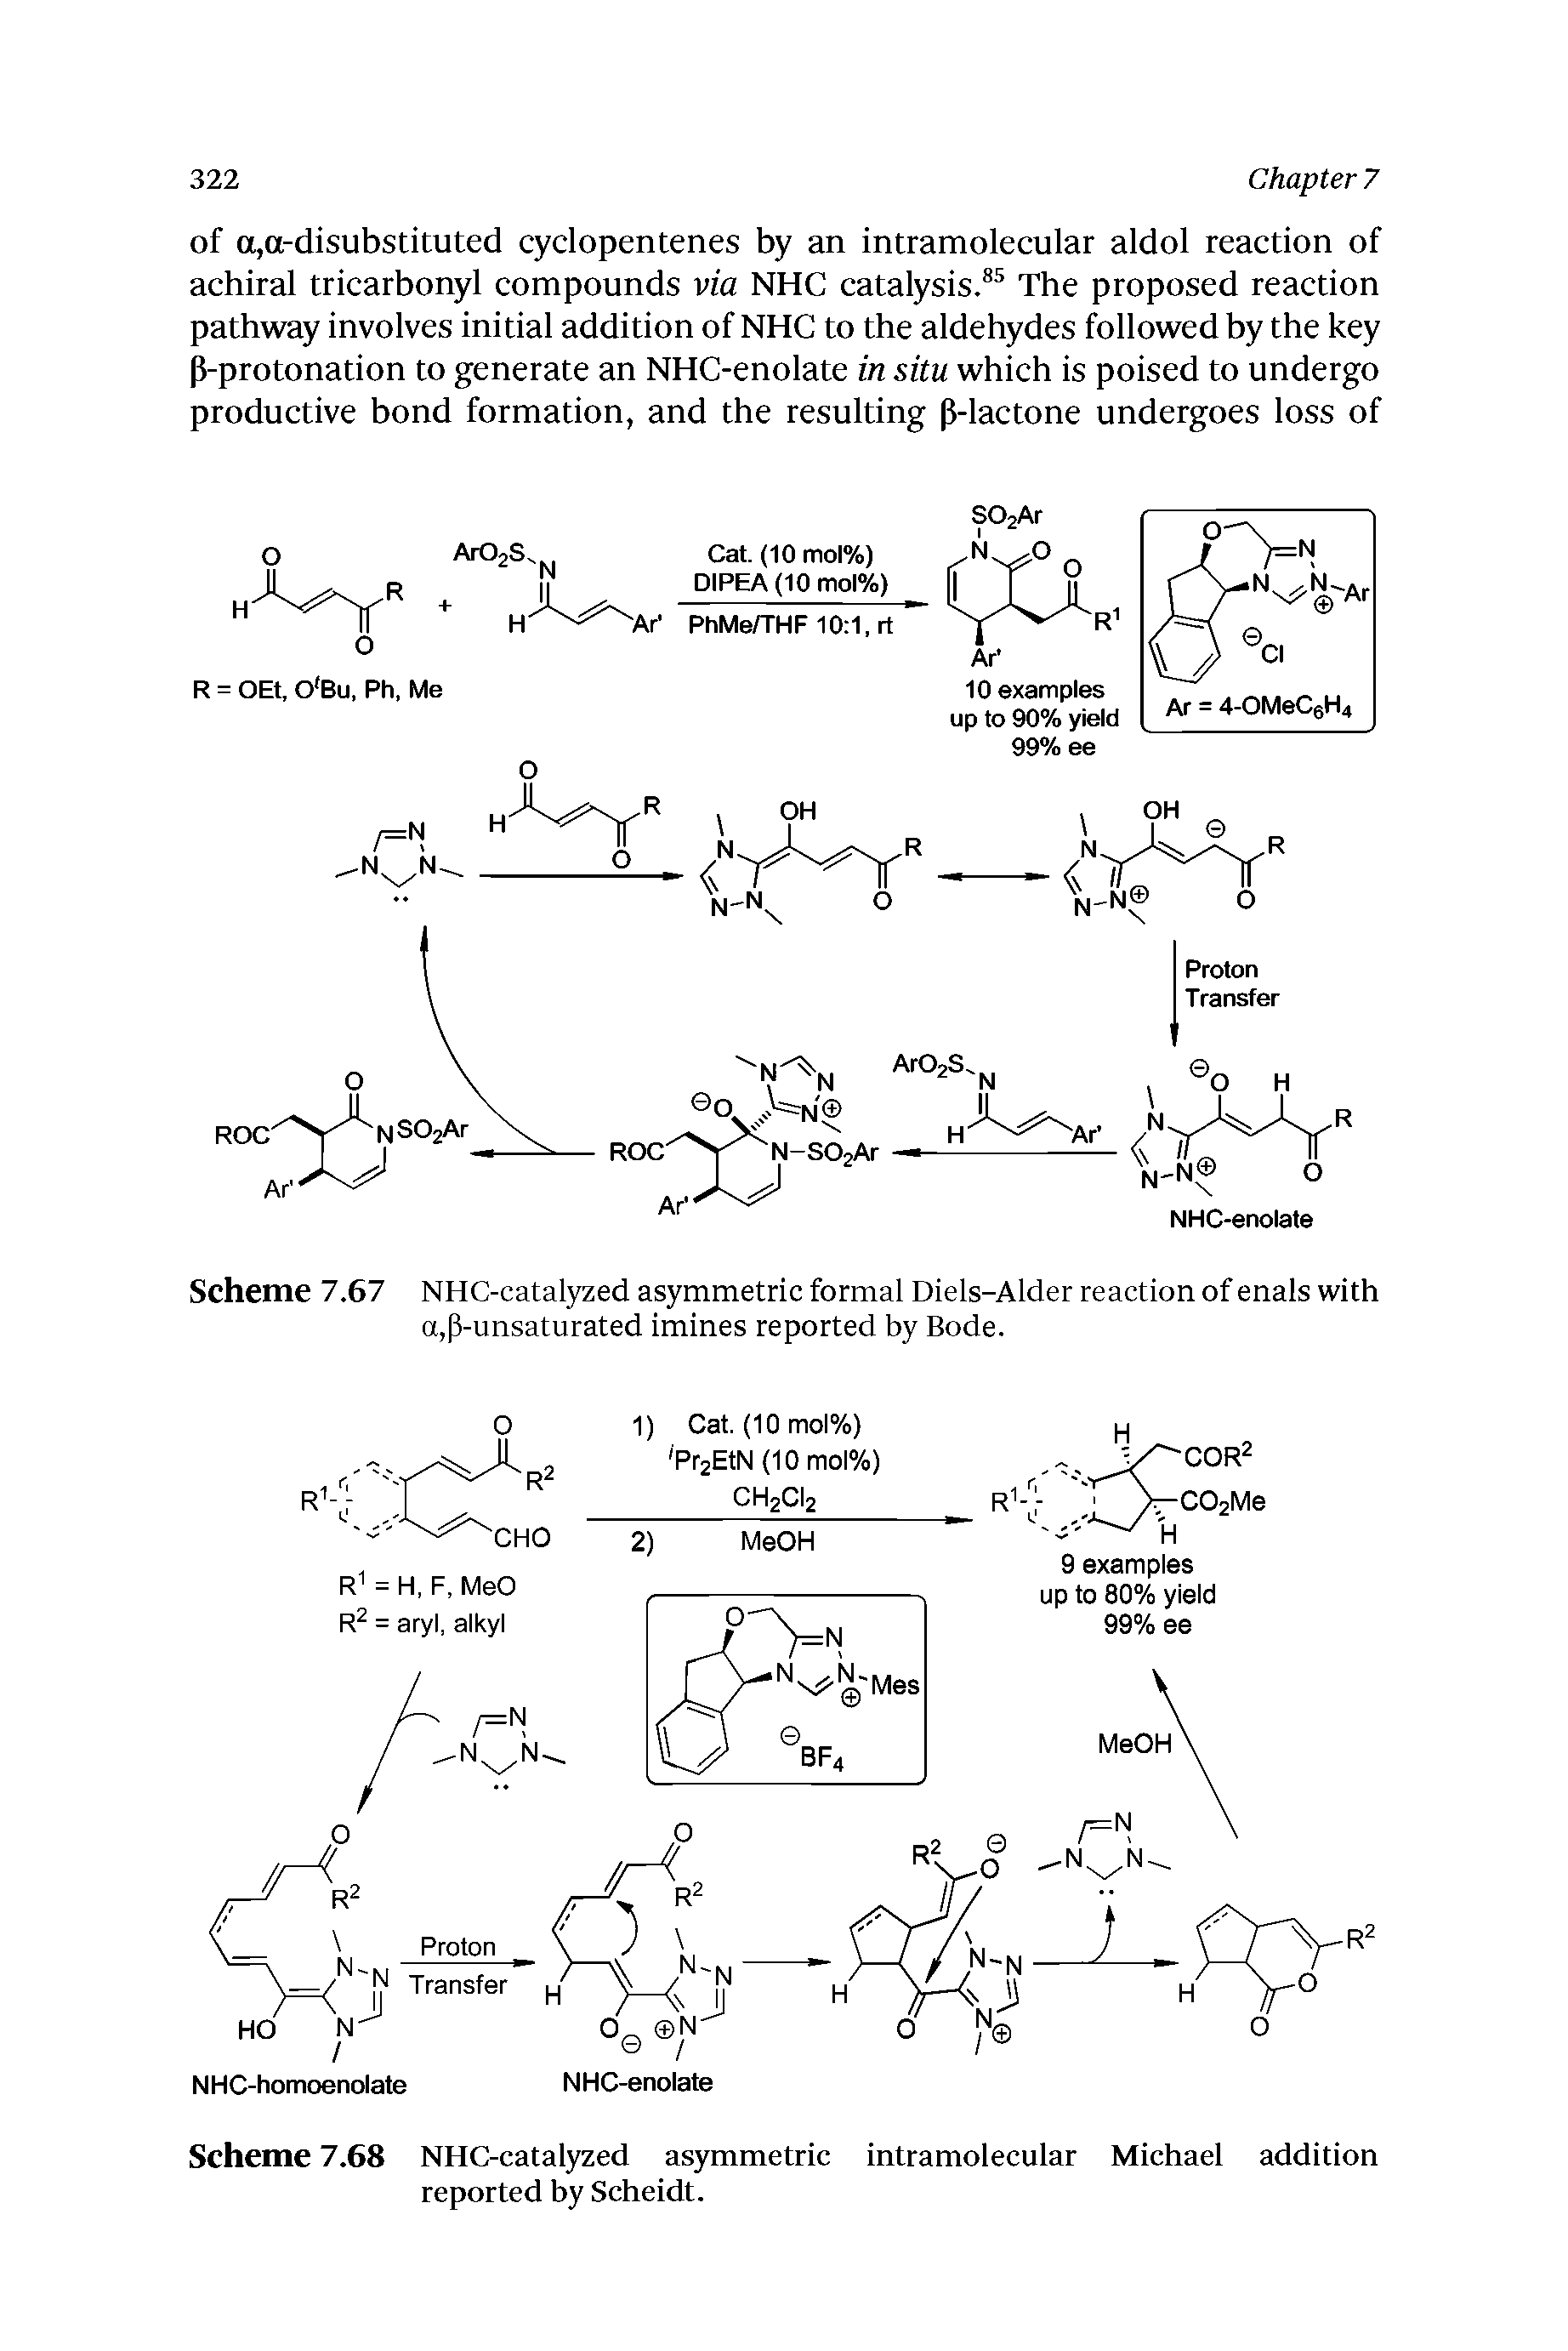 Scheme 7.67 NHC-catalyzed asymmetric formal Diels-Alder reaction of enals with a,p-unsaturated imines reported by Bode.